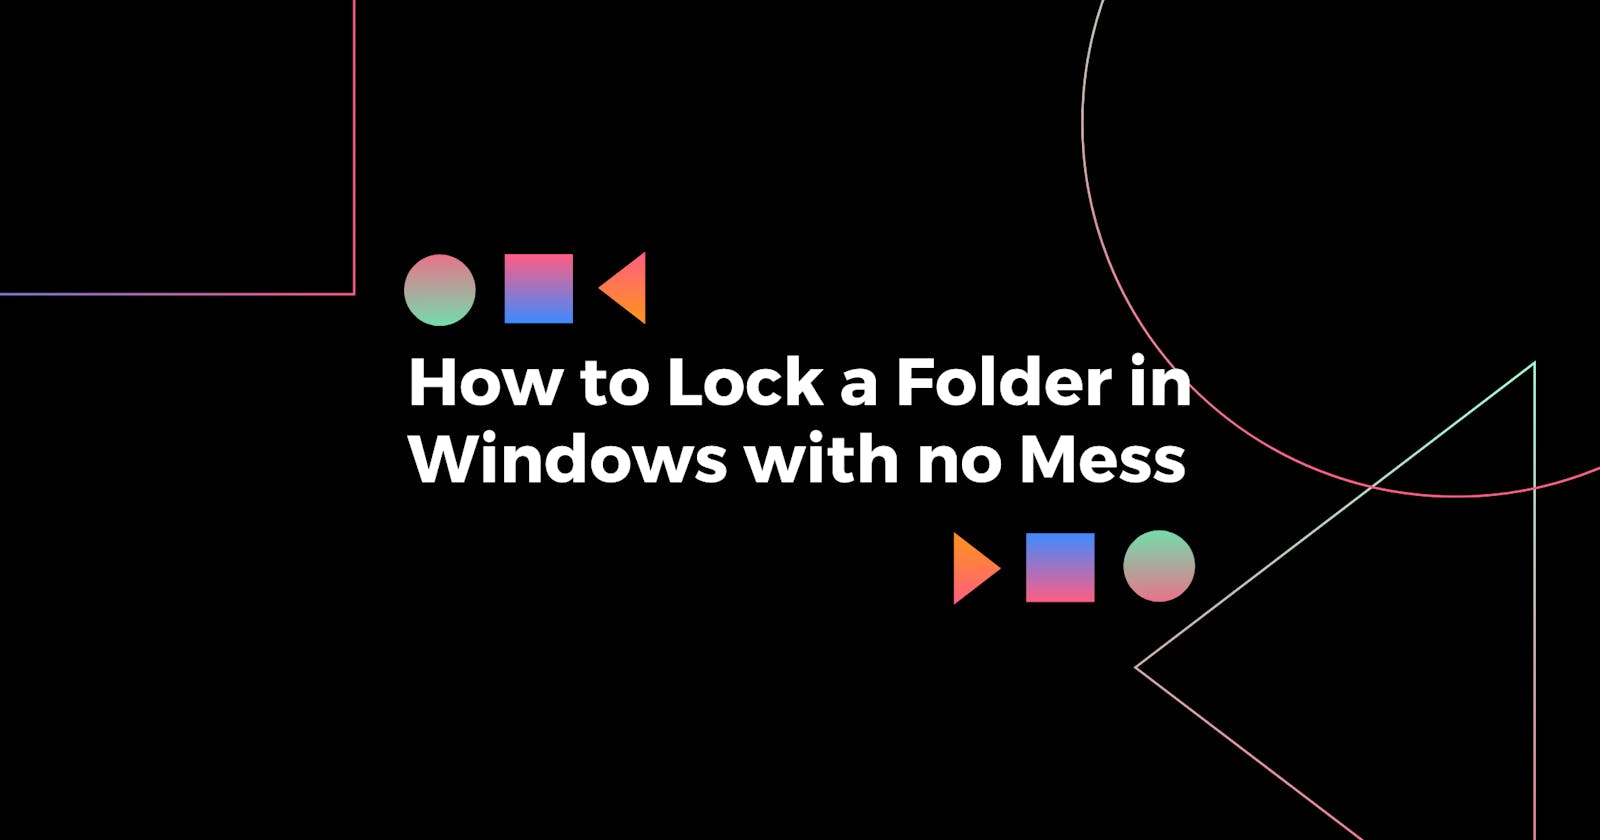 Lock a Folder in Windows with no mess